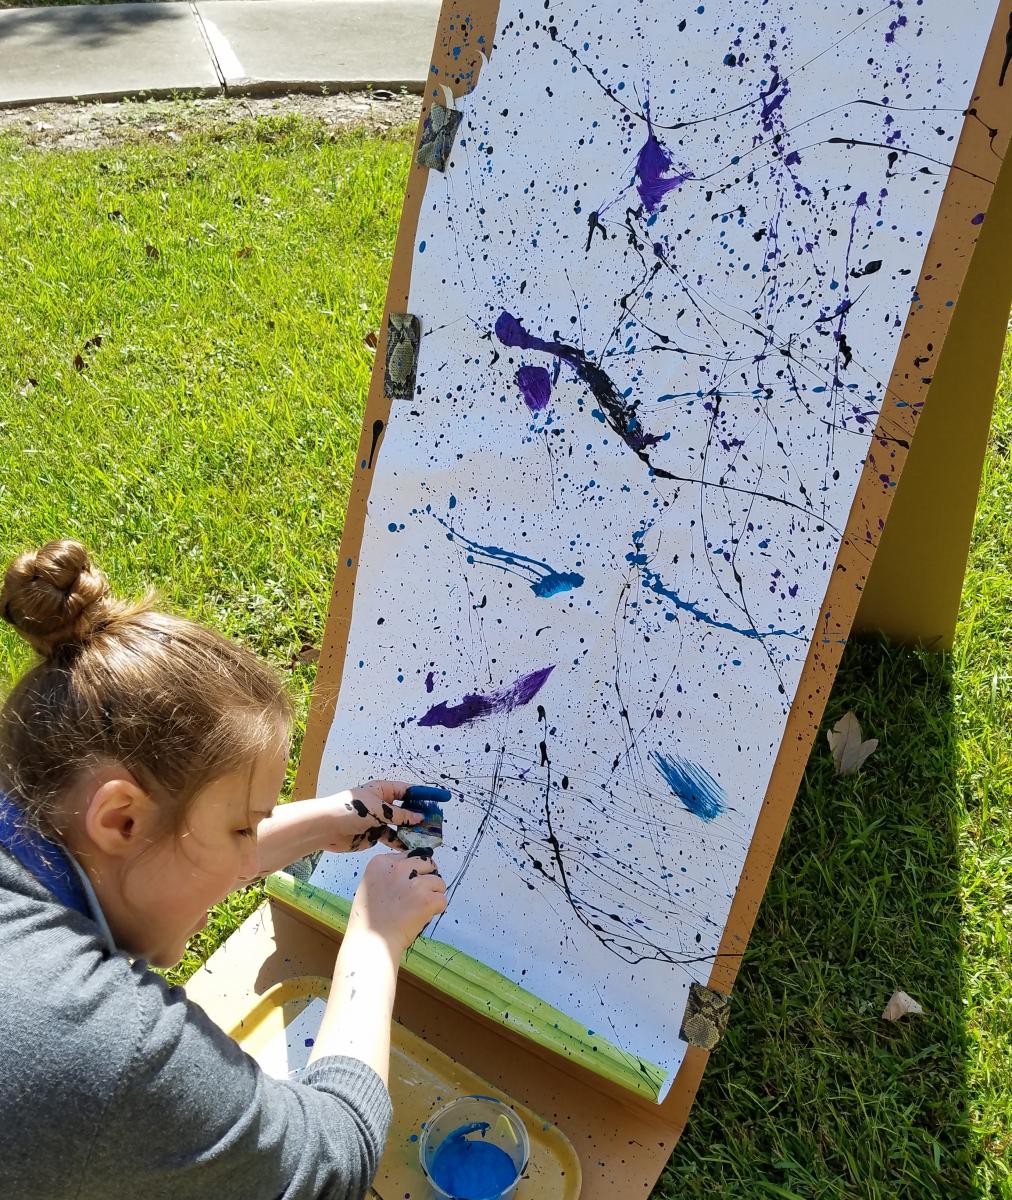 A girl experiments with the style of artist Jackson Pollock